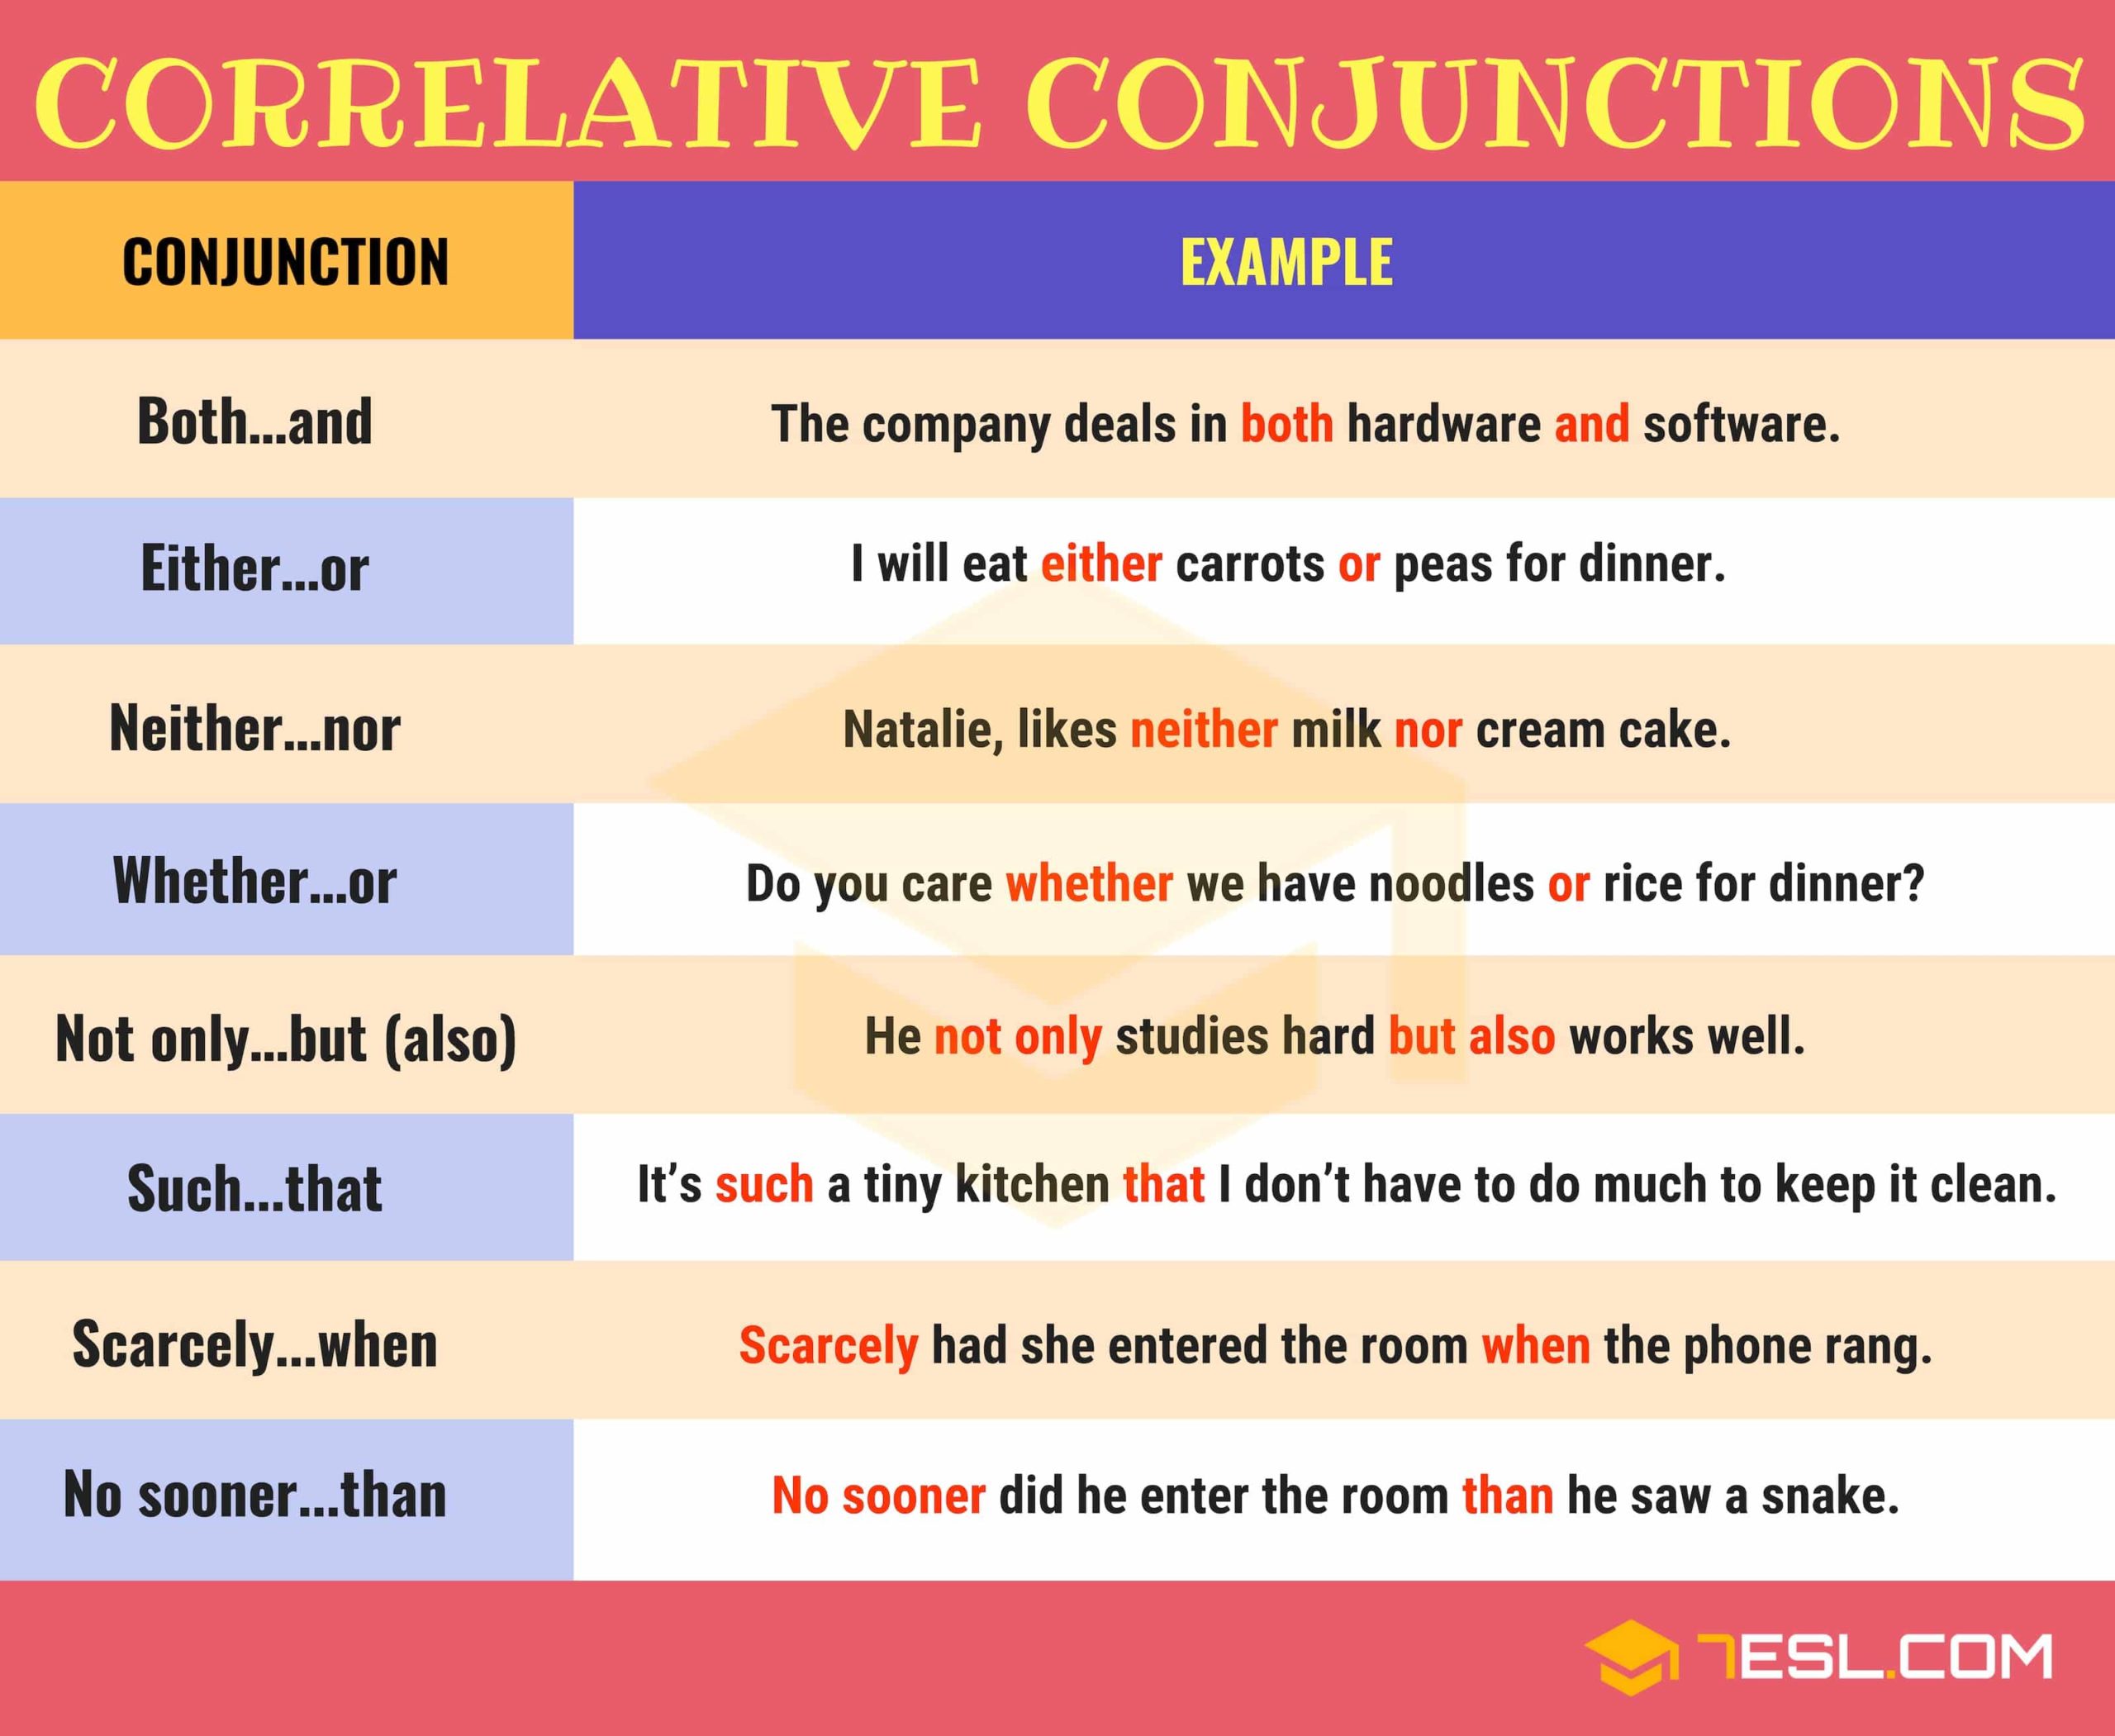 what-are-examples-of-correlative-conjunctions